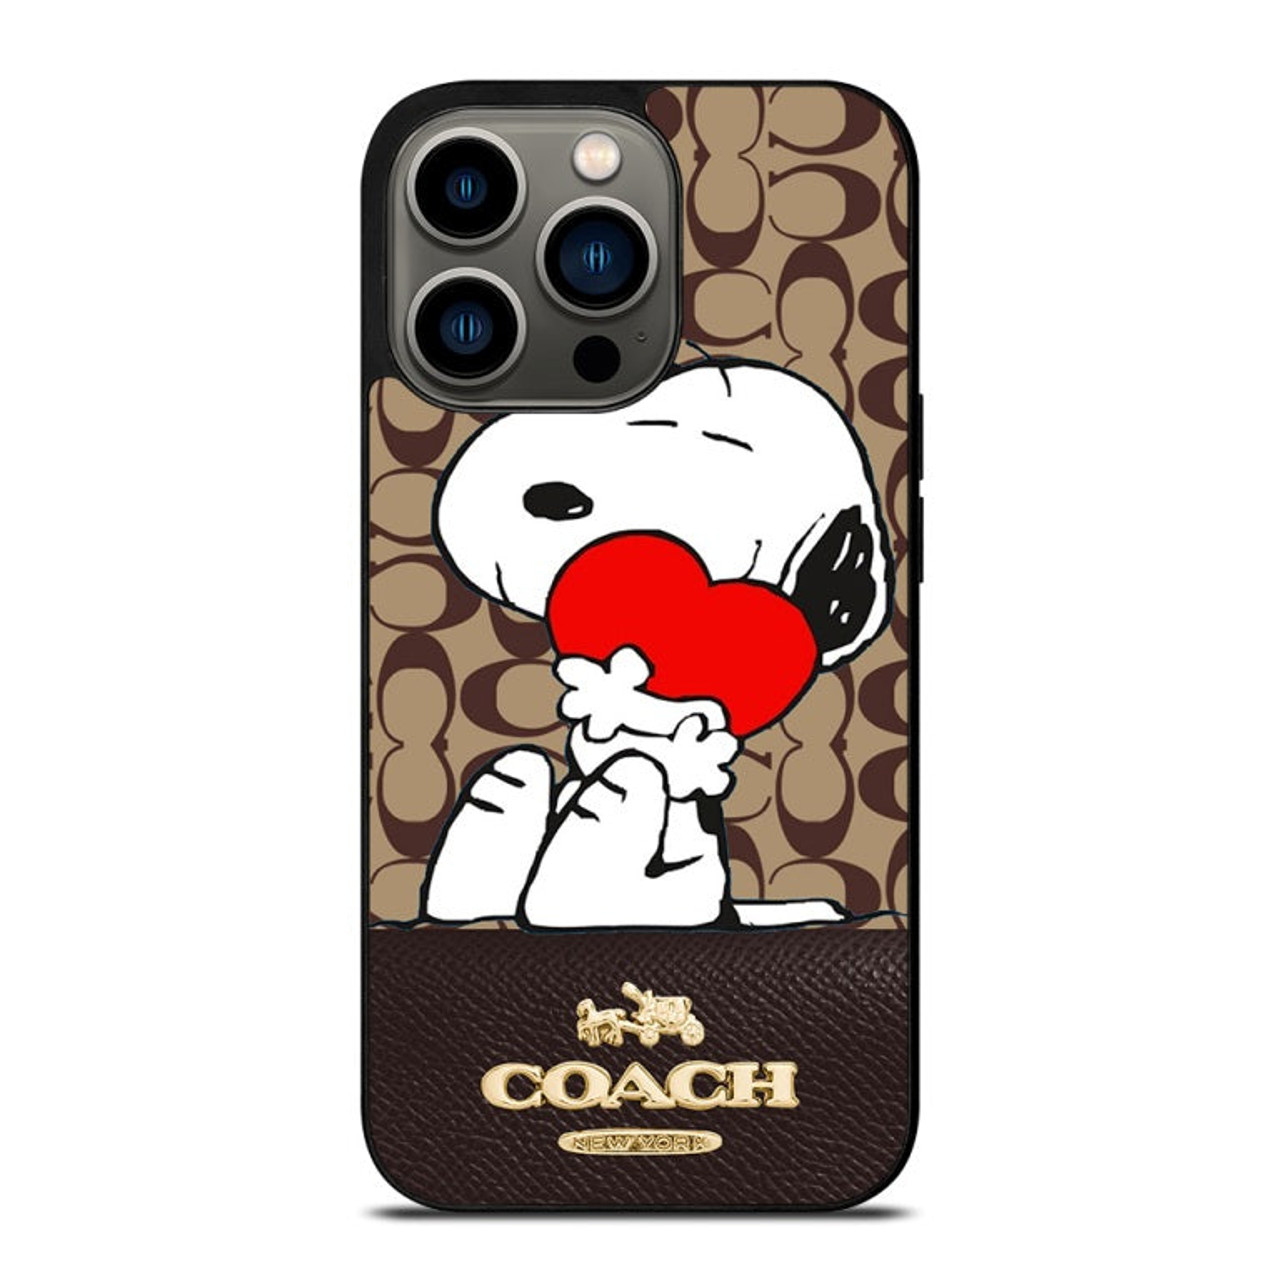 SNOOPY LOUIS VUITTON DAB iPhone 13 Pro Max Case Cover